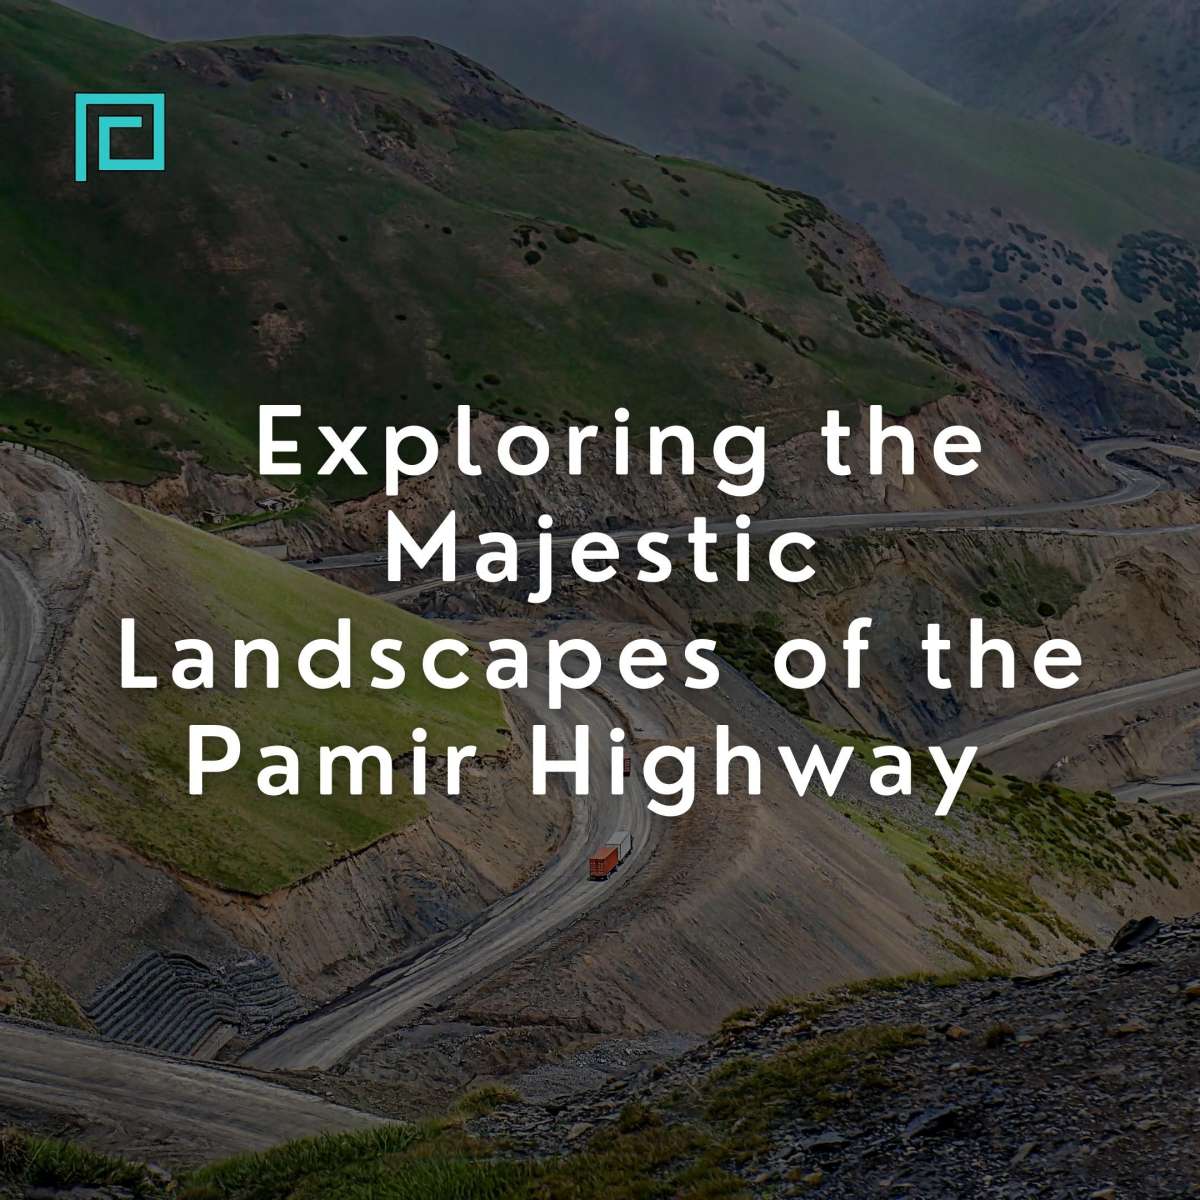 Exploring the Majestic Landscapes of the Pamir Highway